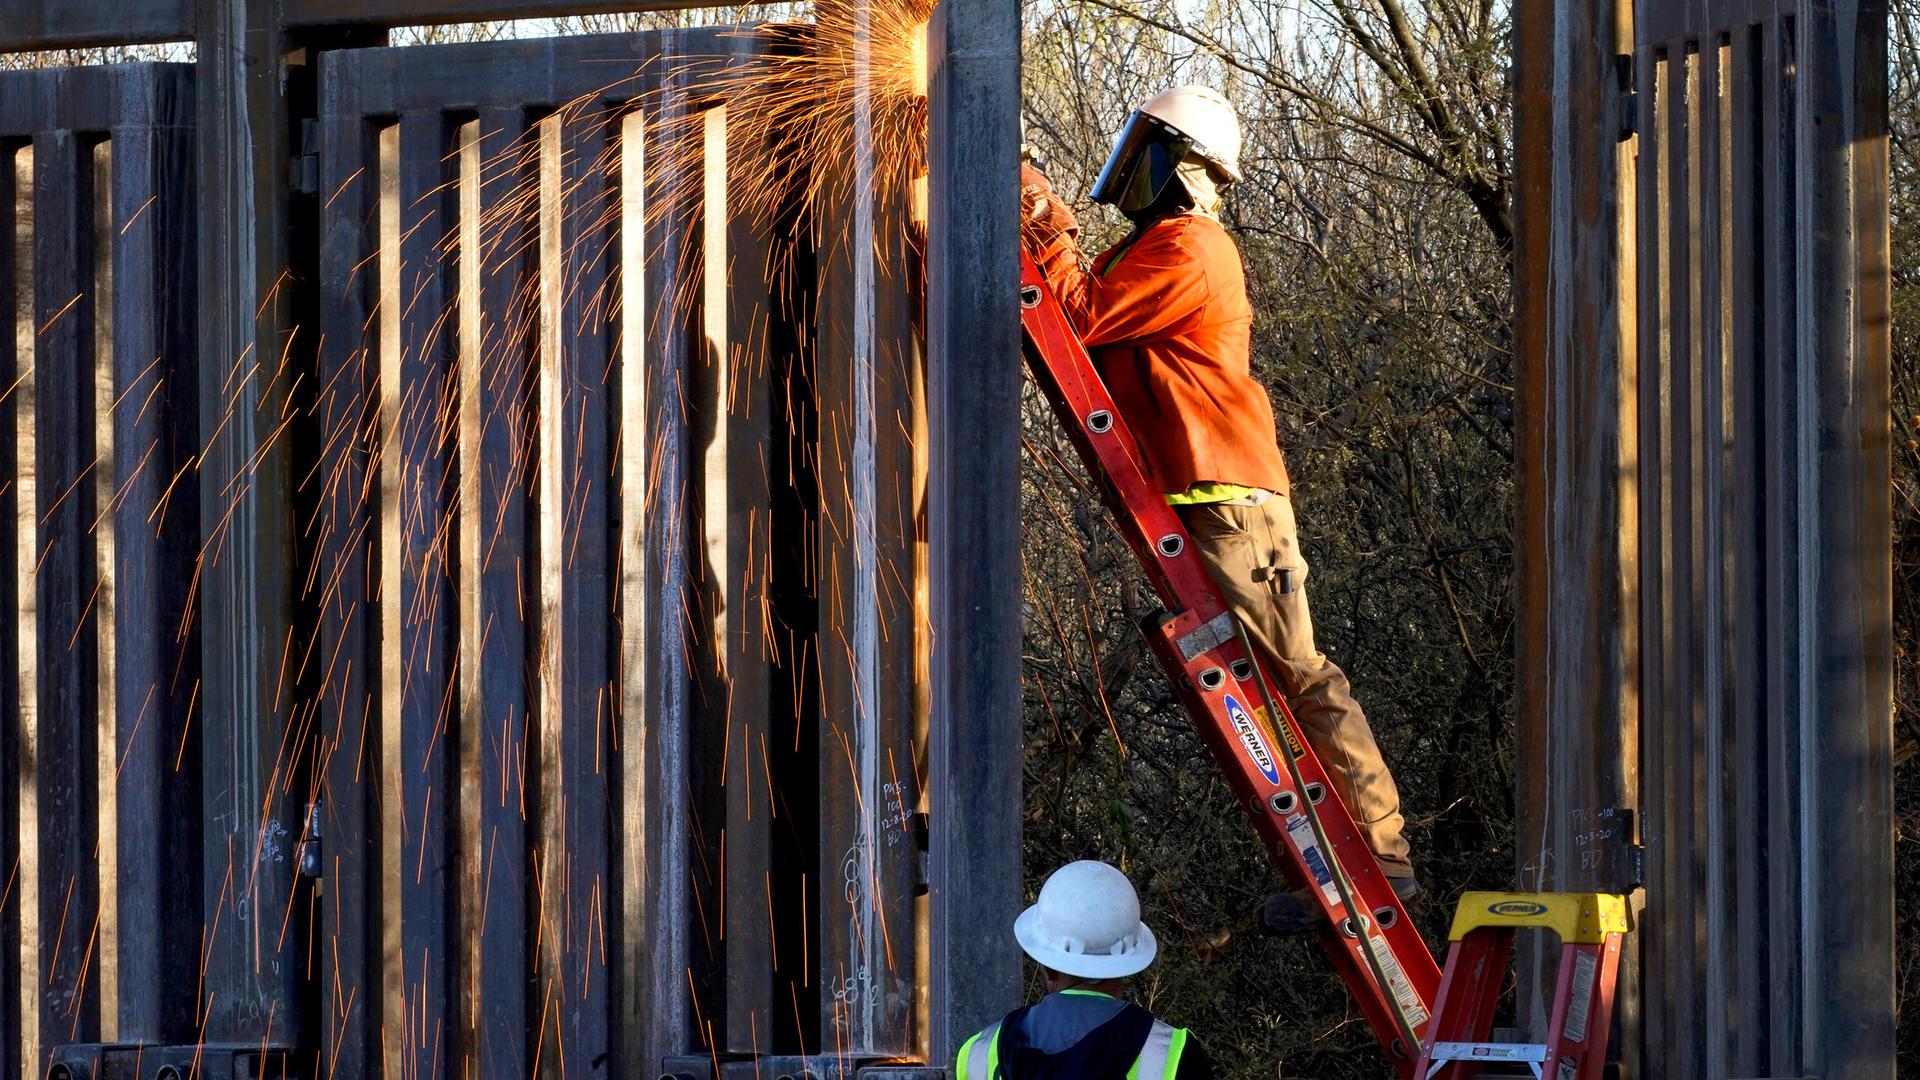 A man is shown standing on a ladder and using a machine causing sparks to fly in the construction of a border wall.